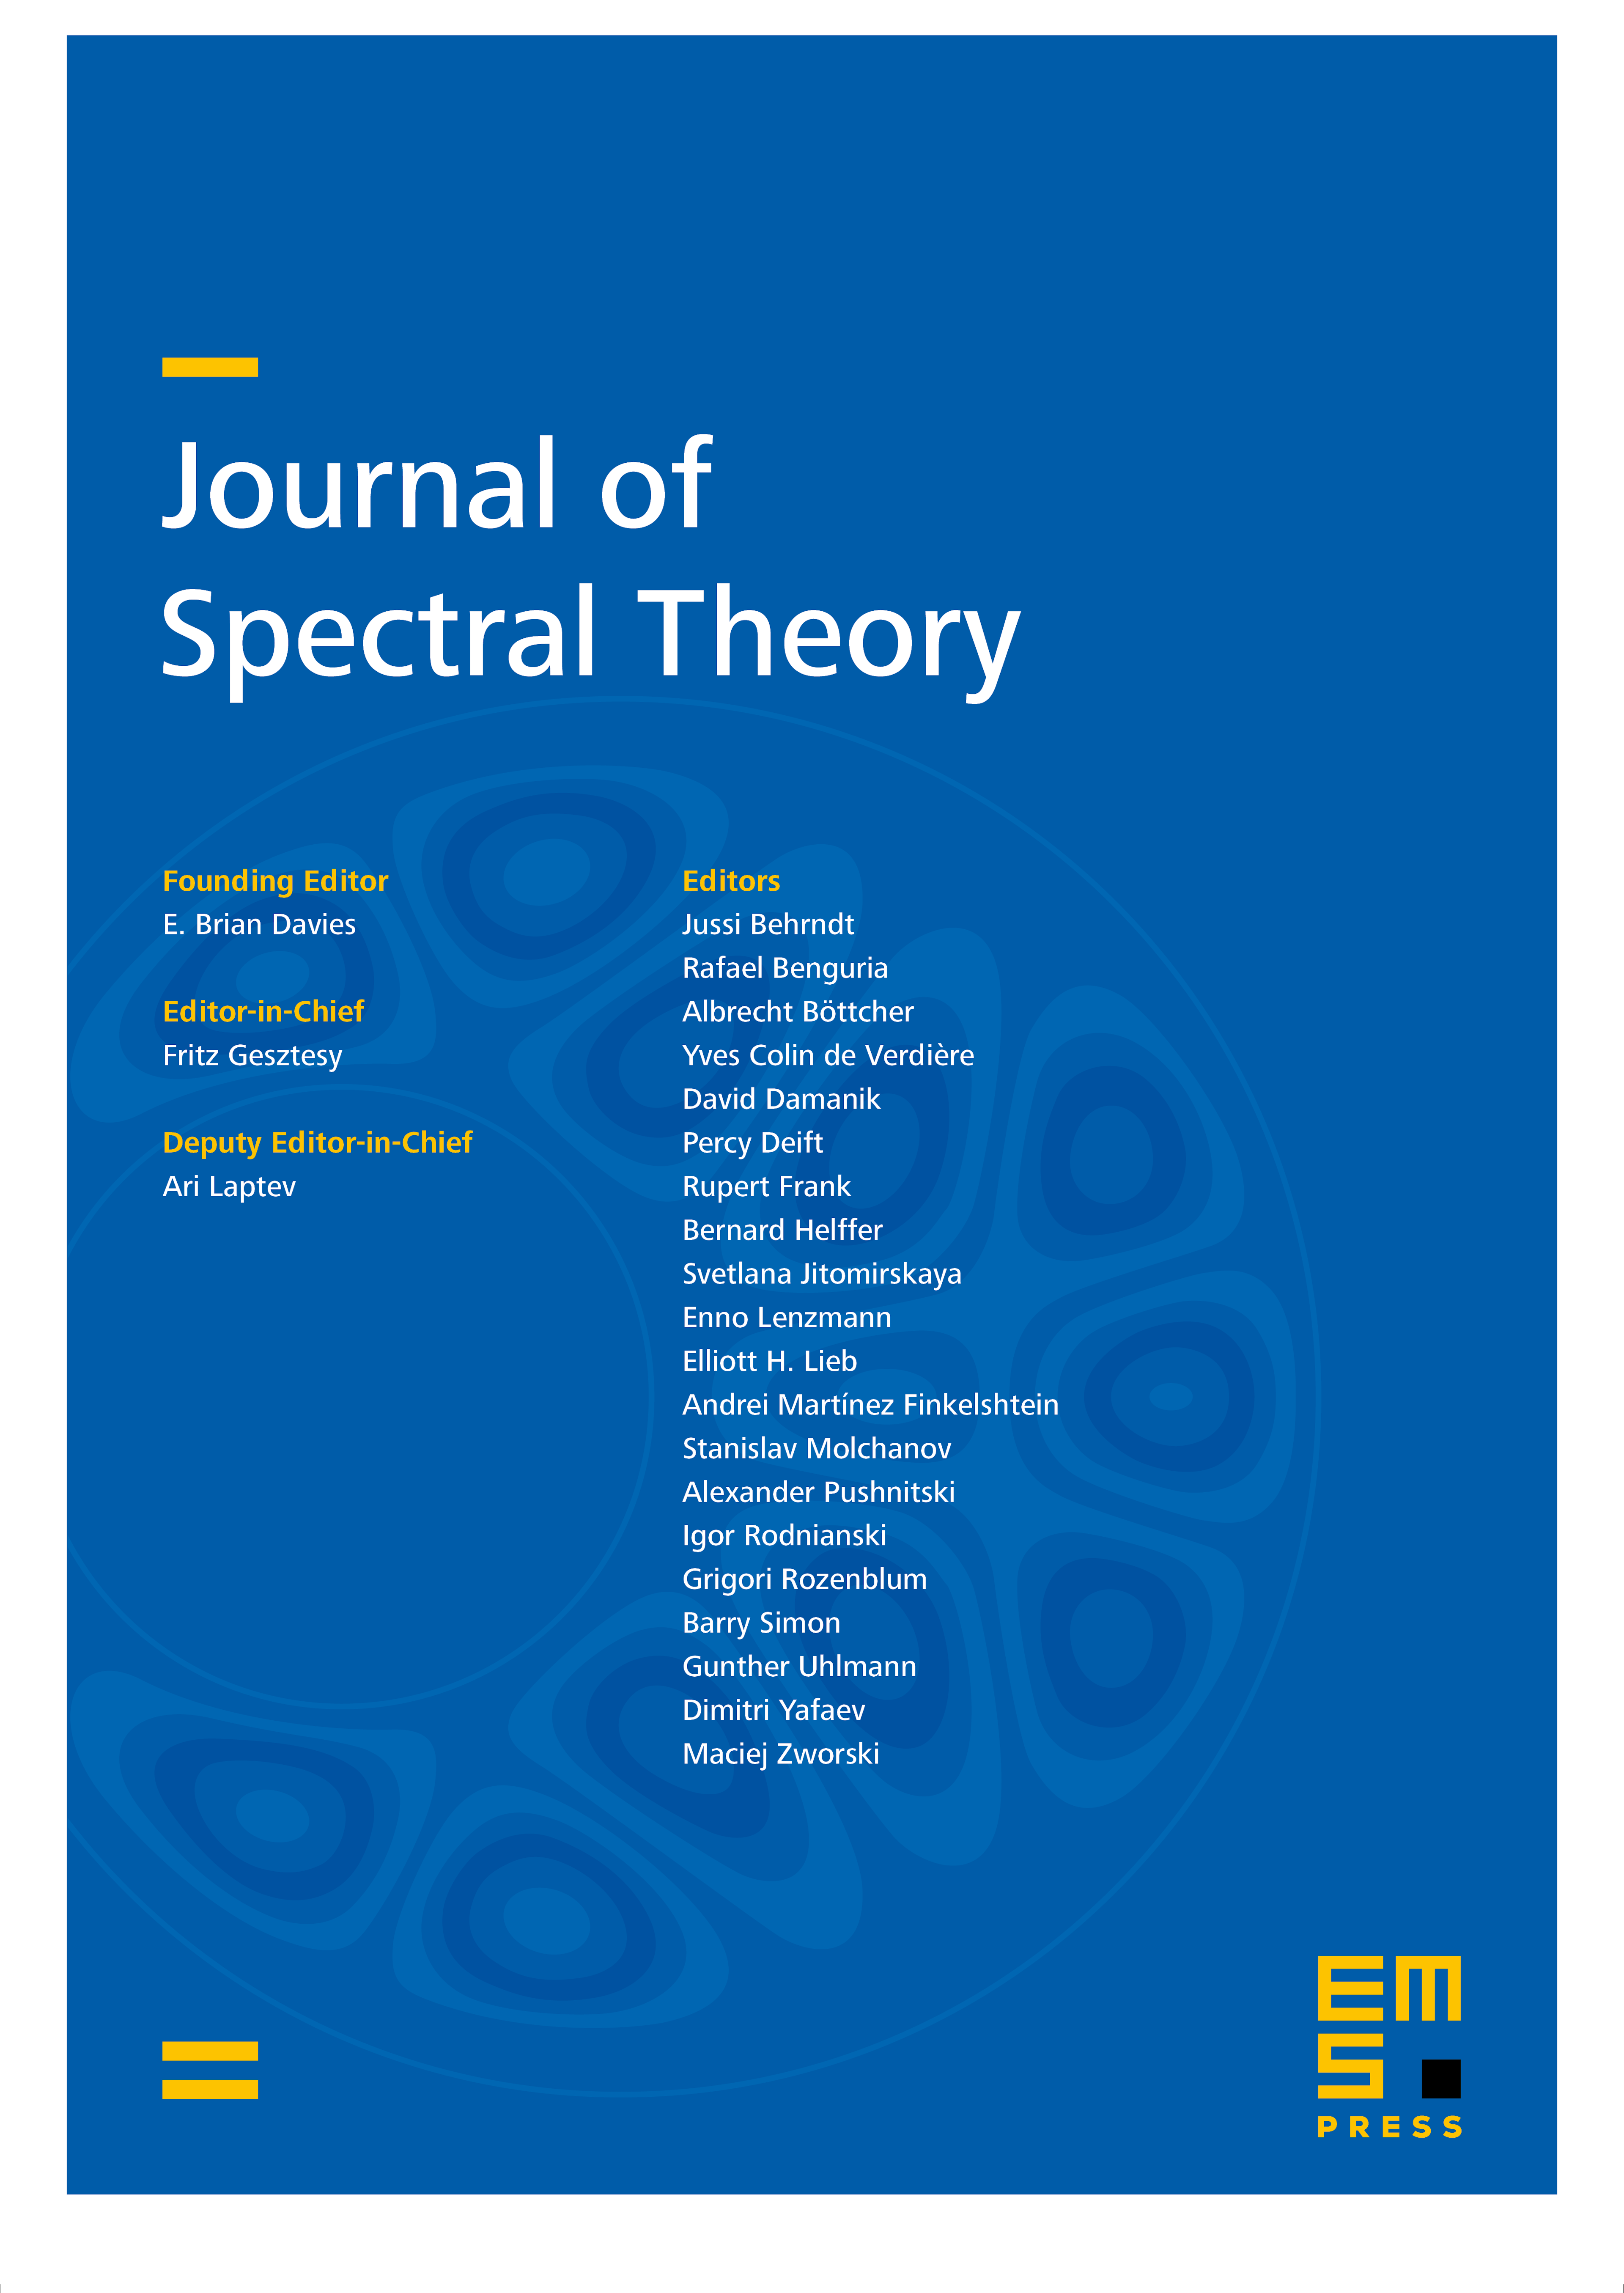 Cwikel's theorem and the CLR inequality cover